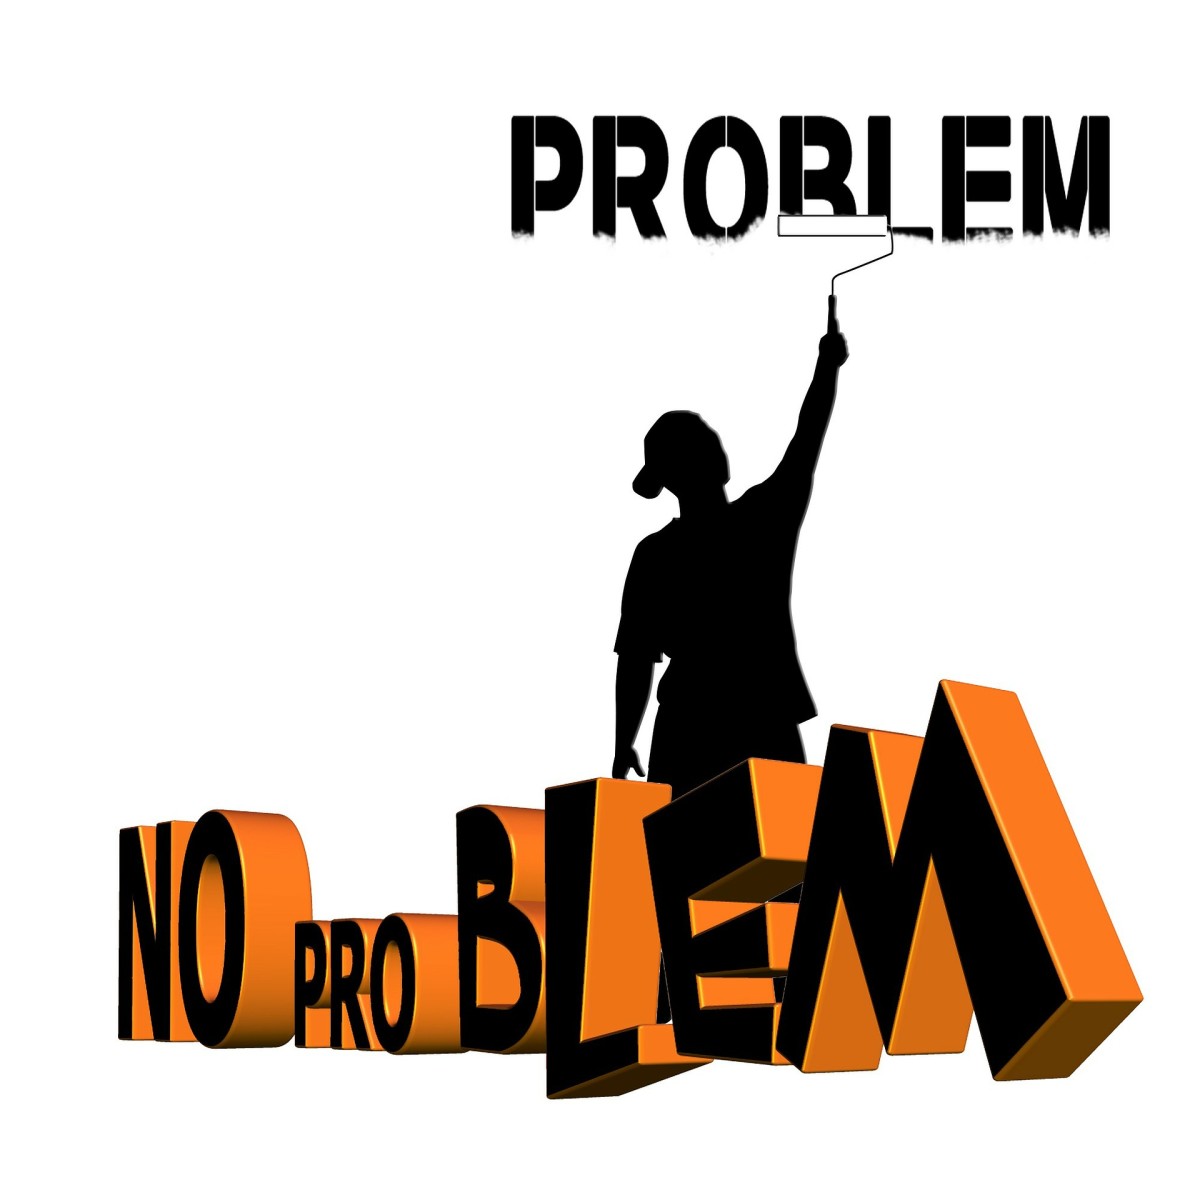 Poems: No Problem, You Got This! ~ Response to Word Prompt  Week 62